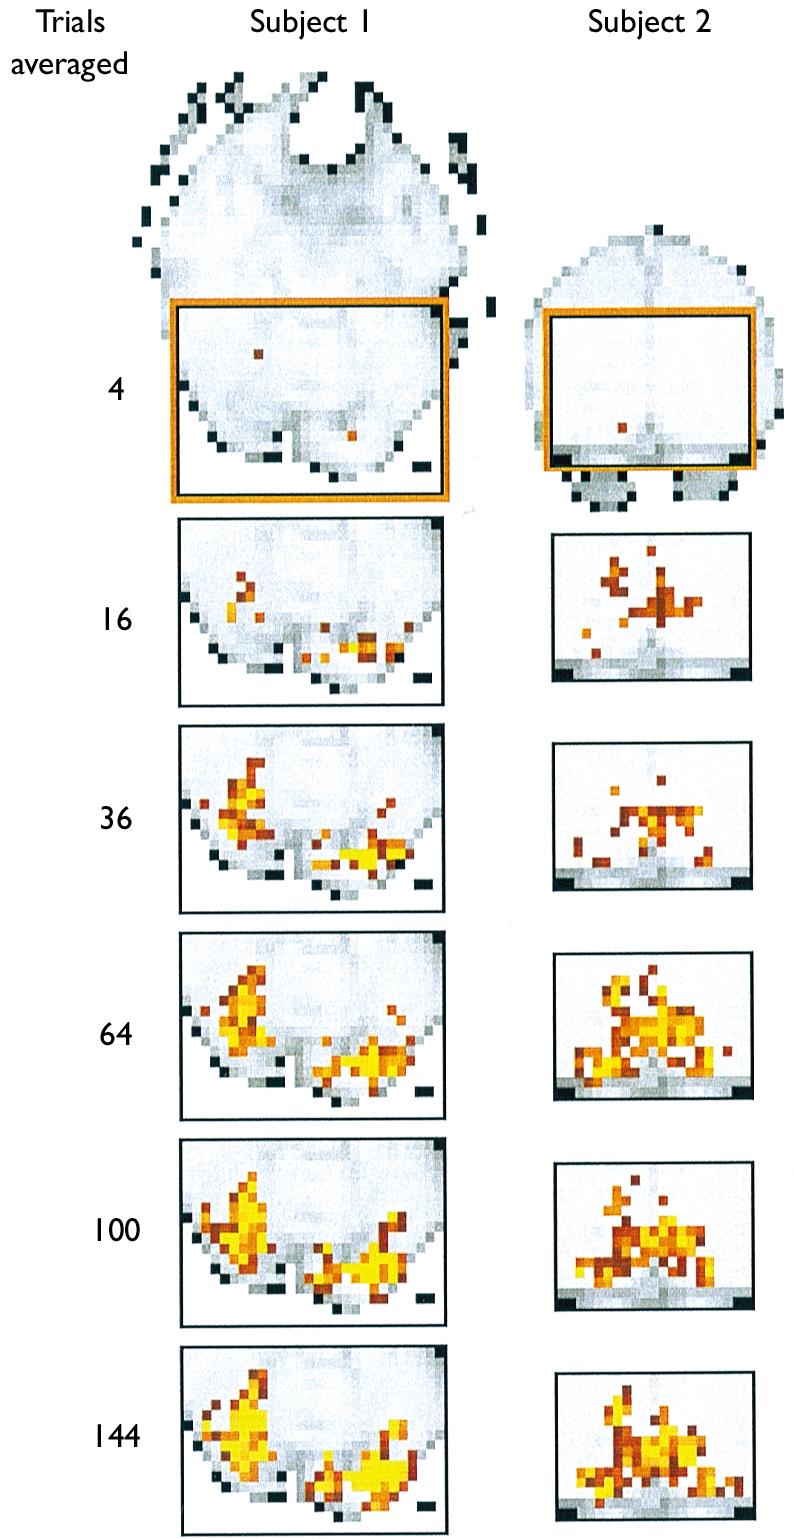 NEUROREPORT S. A. HUETTEL AND G. McCARTHY Fig.. Changes in the spatial topography of activation with increasing numbers of trials.